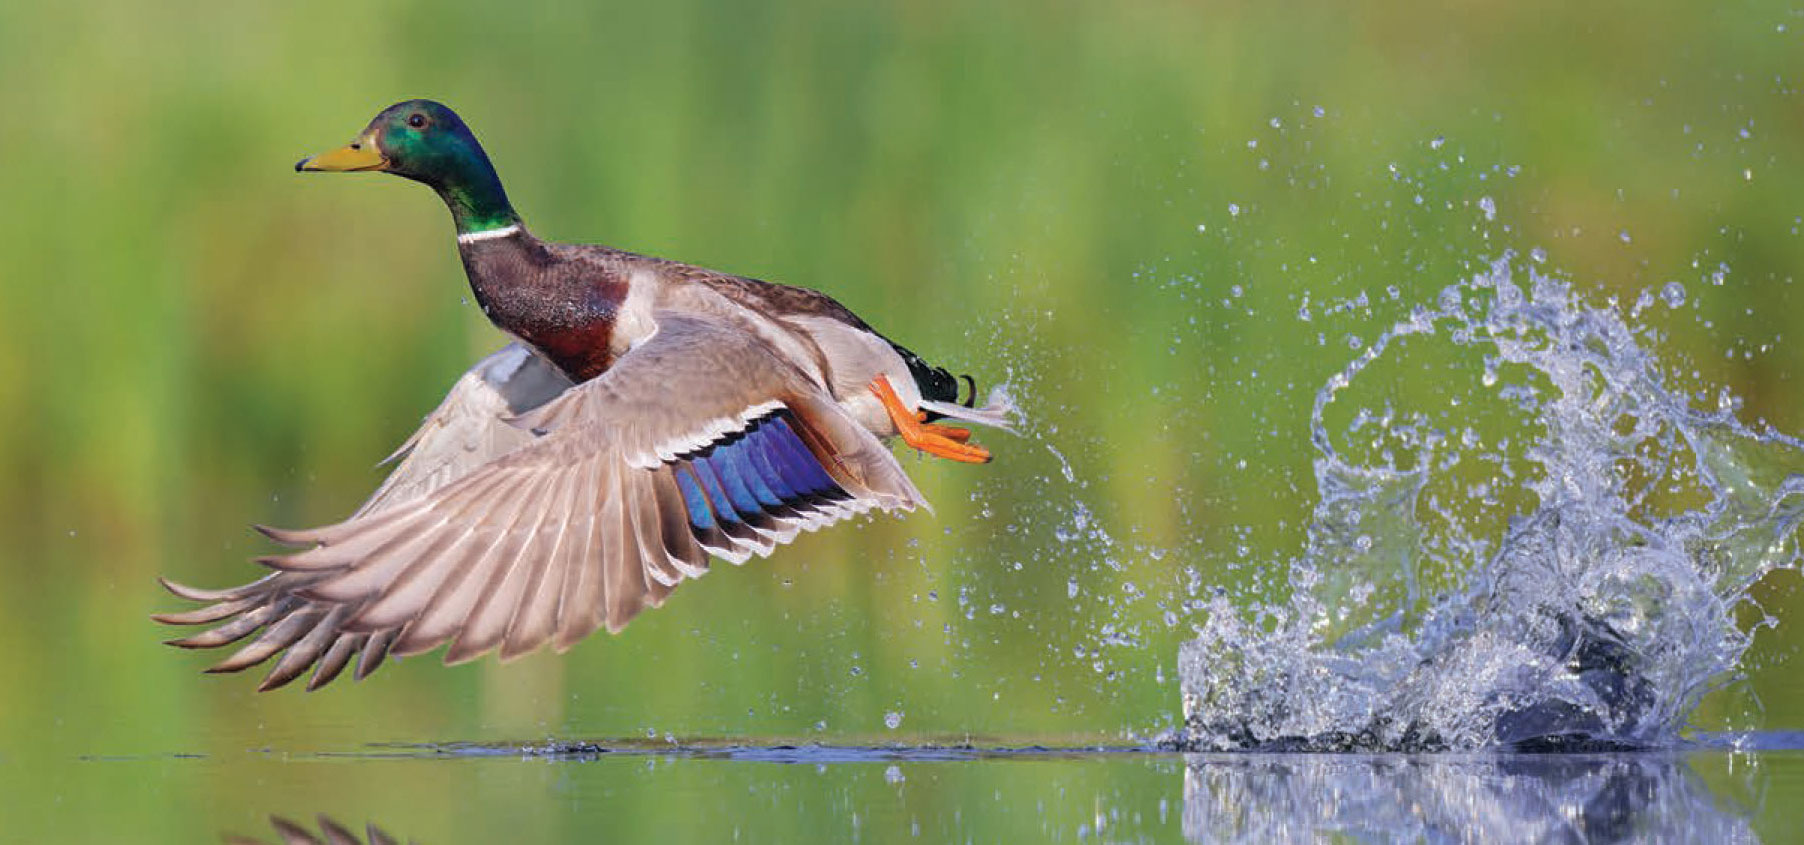 Mallard taking off by Kevin Hice